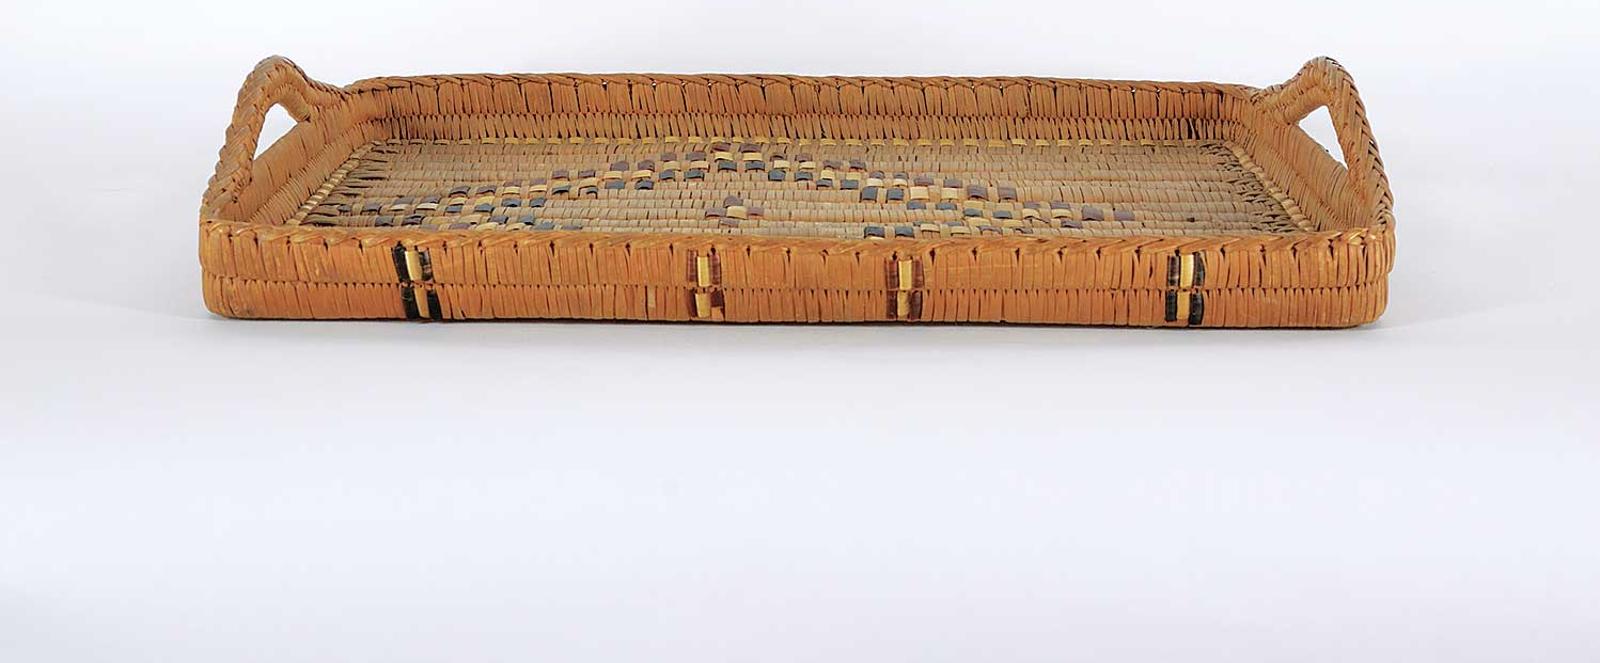 Northwest Coast First Nations School - Interior Salish Woven Tray with Handles